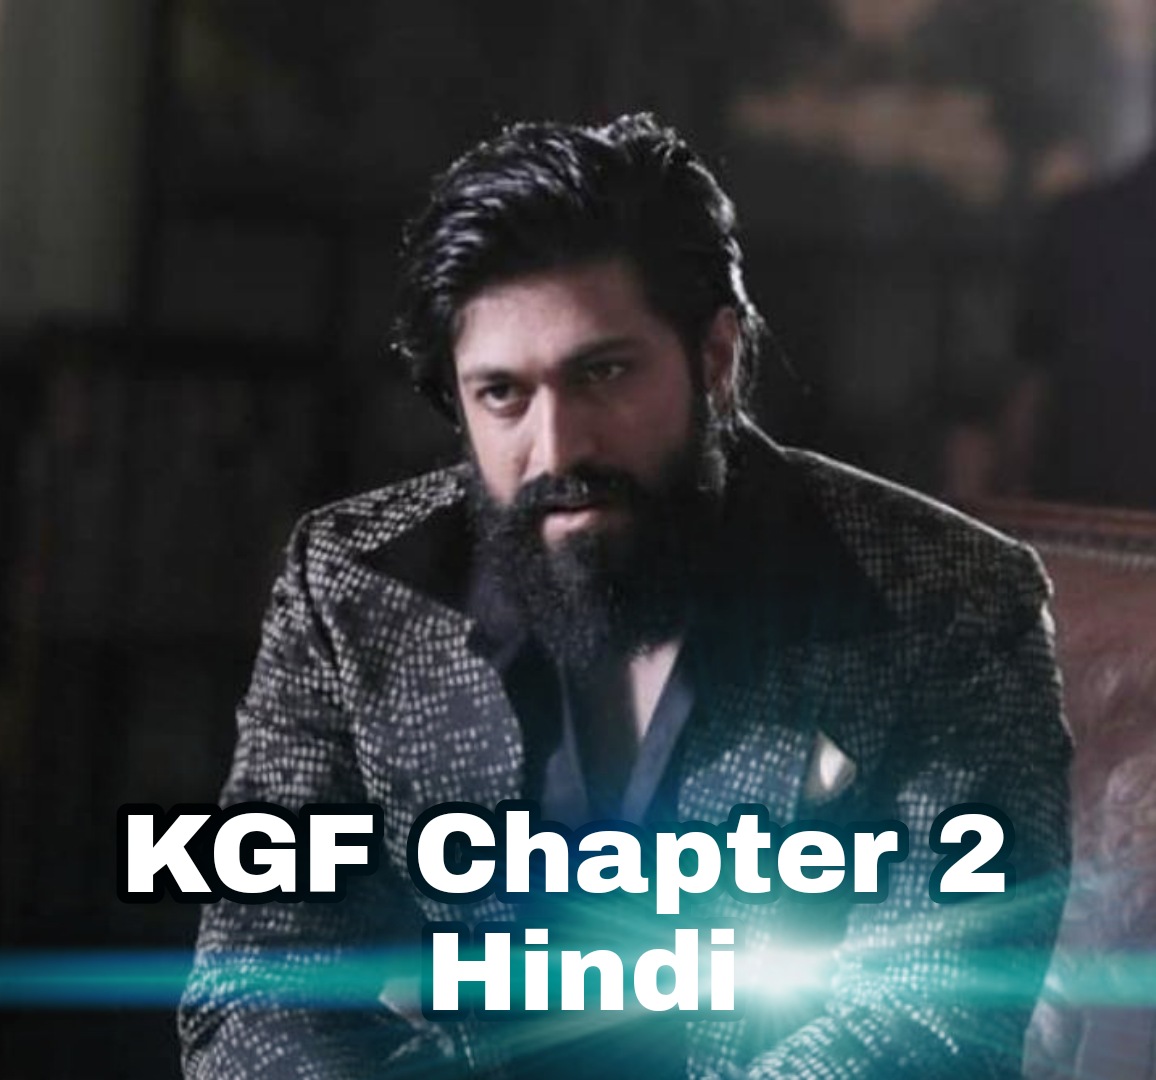 Where can I see KGF chapter 2 Hindi ?  | How to watch kgf chapter 2 hindi